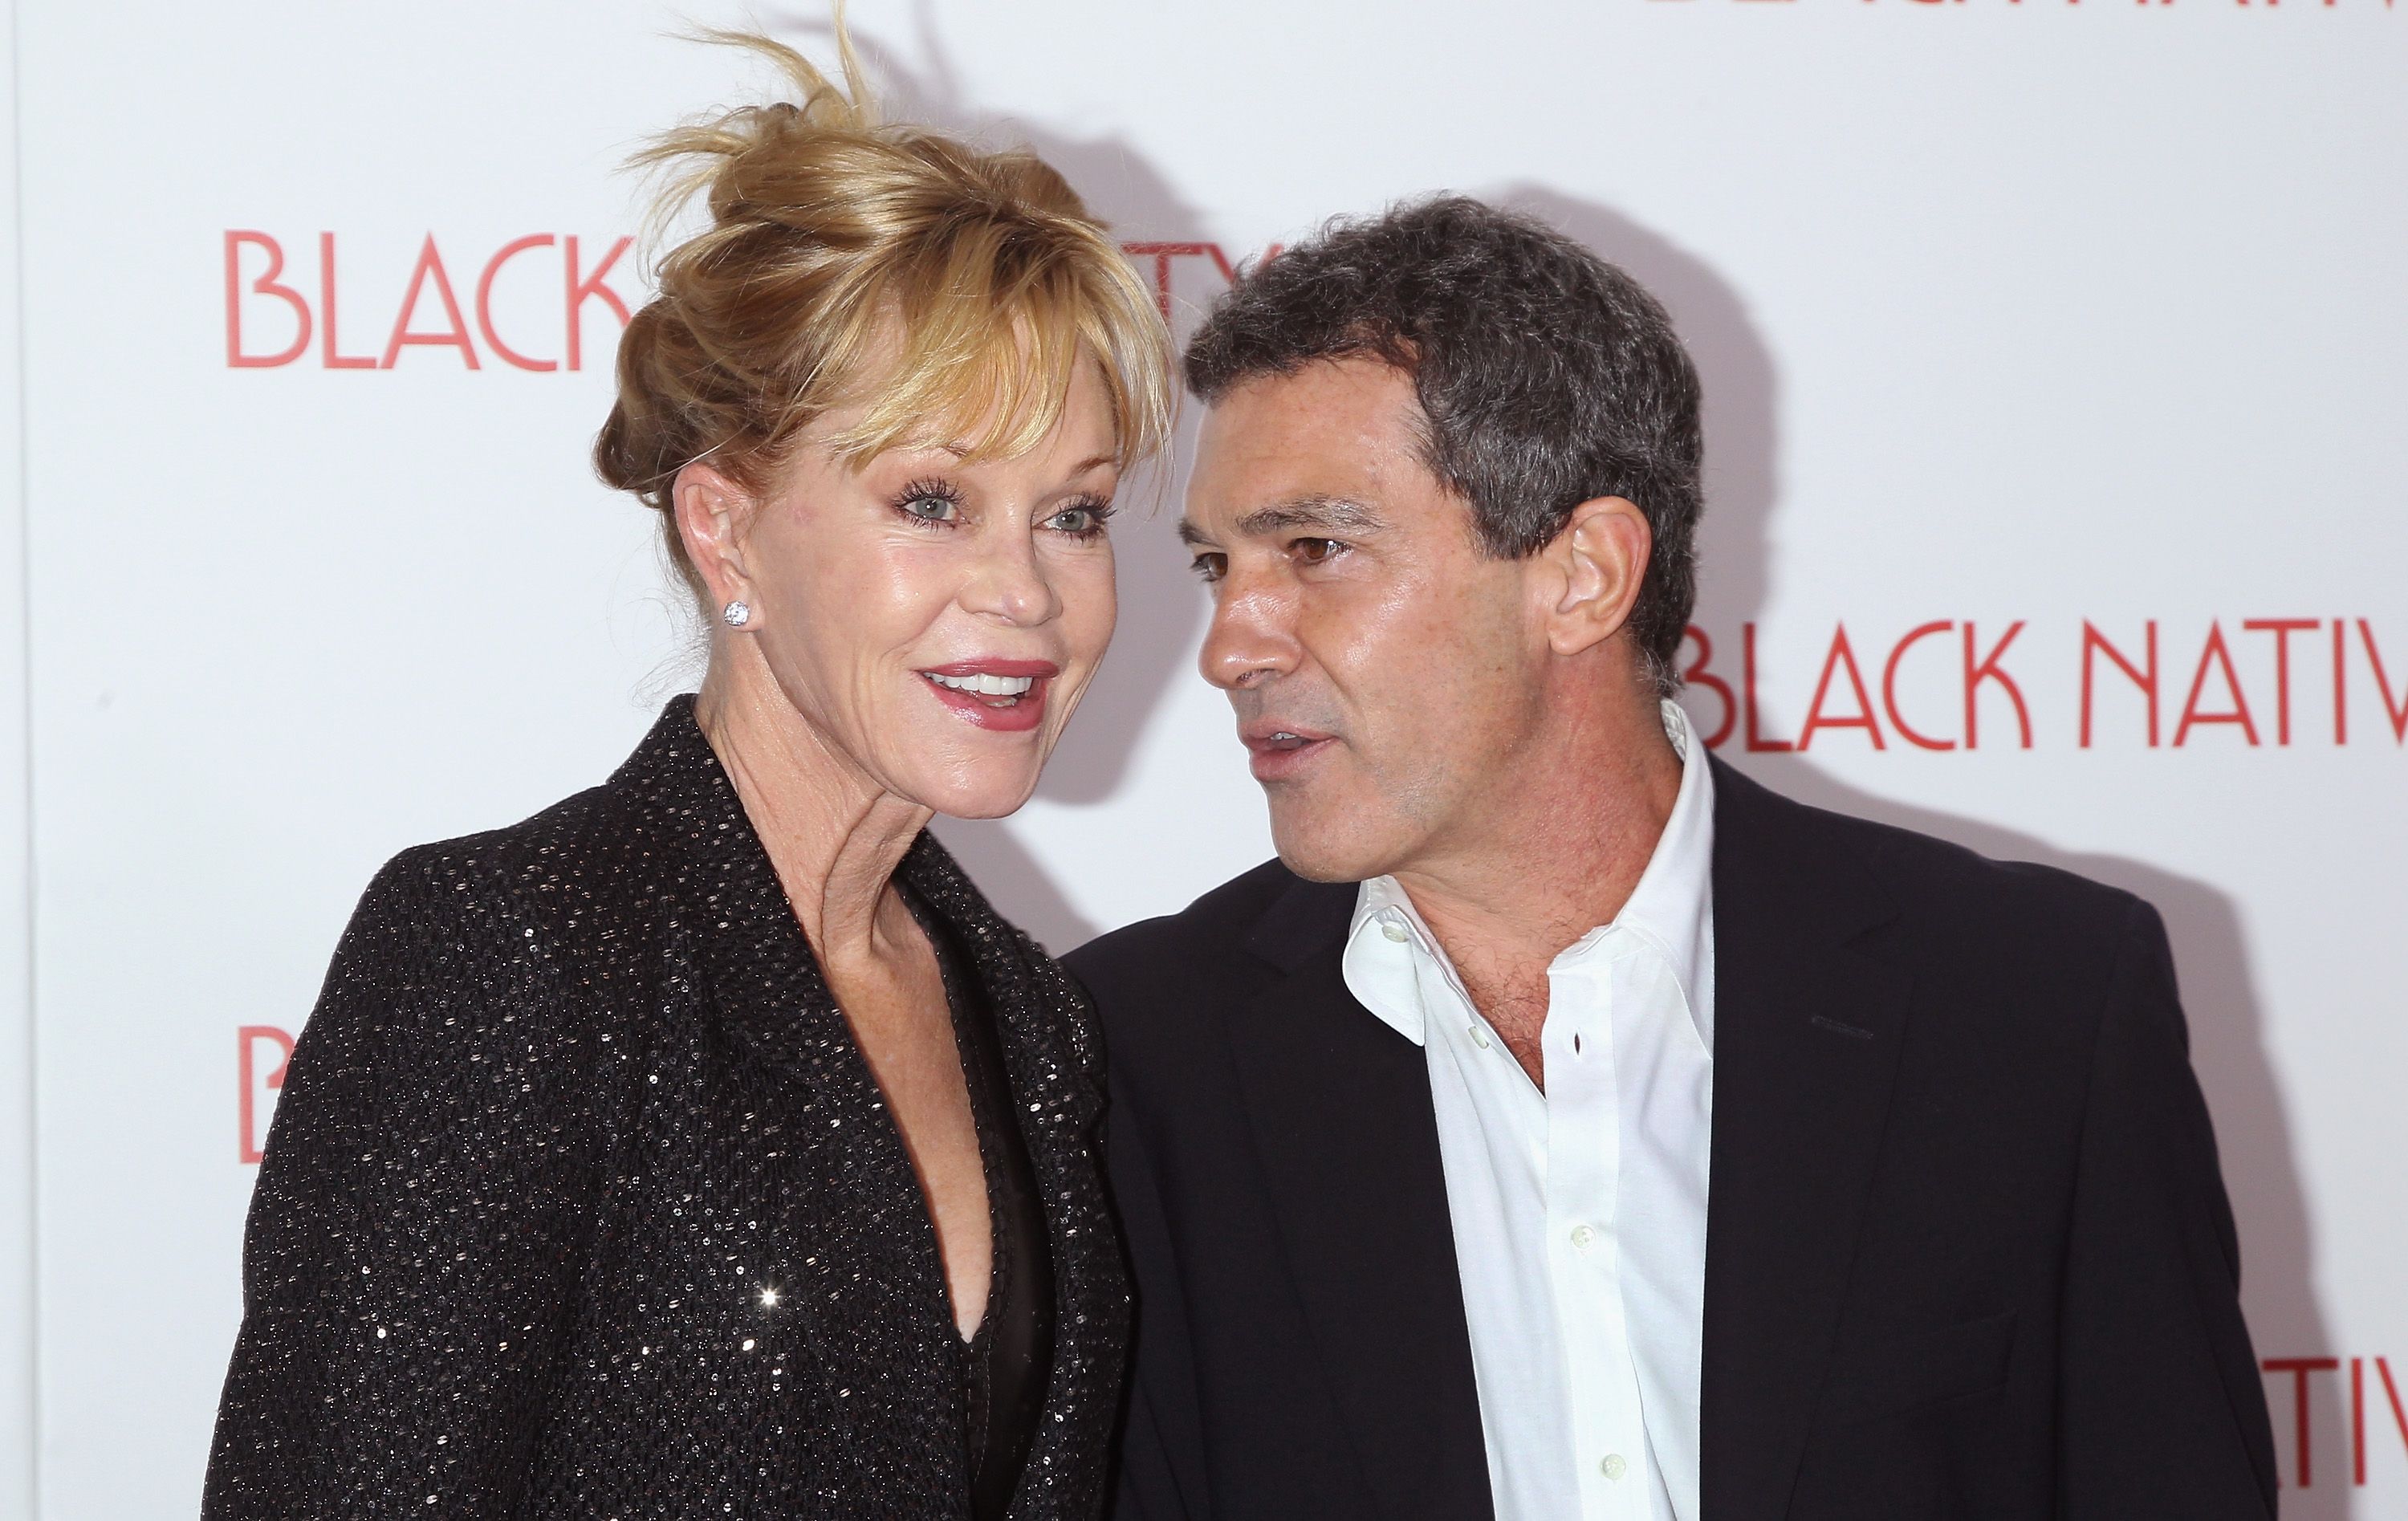 Melanie Griffith and Antonio Banderas at the "Black Nativity" premiere in 2013 in New York City | Source: Getty Images